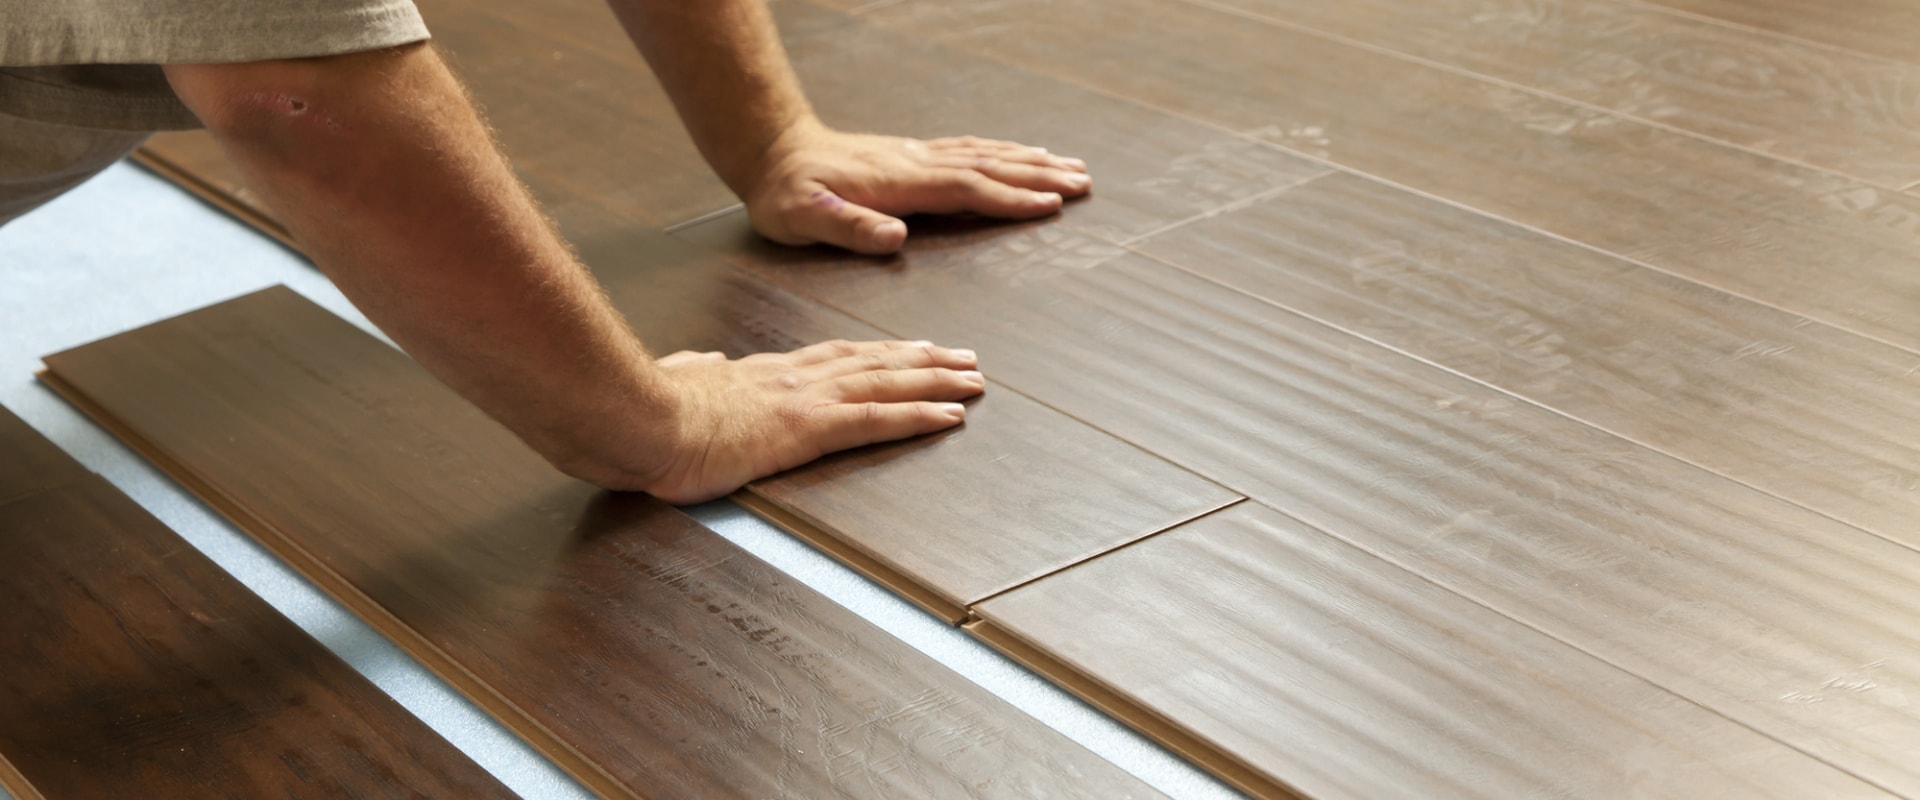 The Best Flooring Options for Beginners